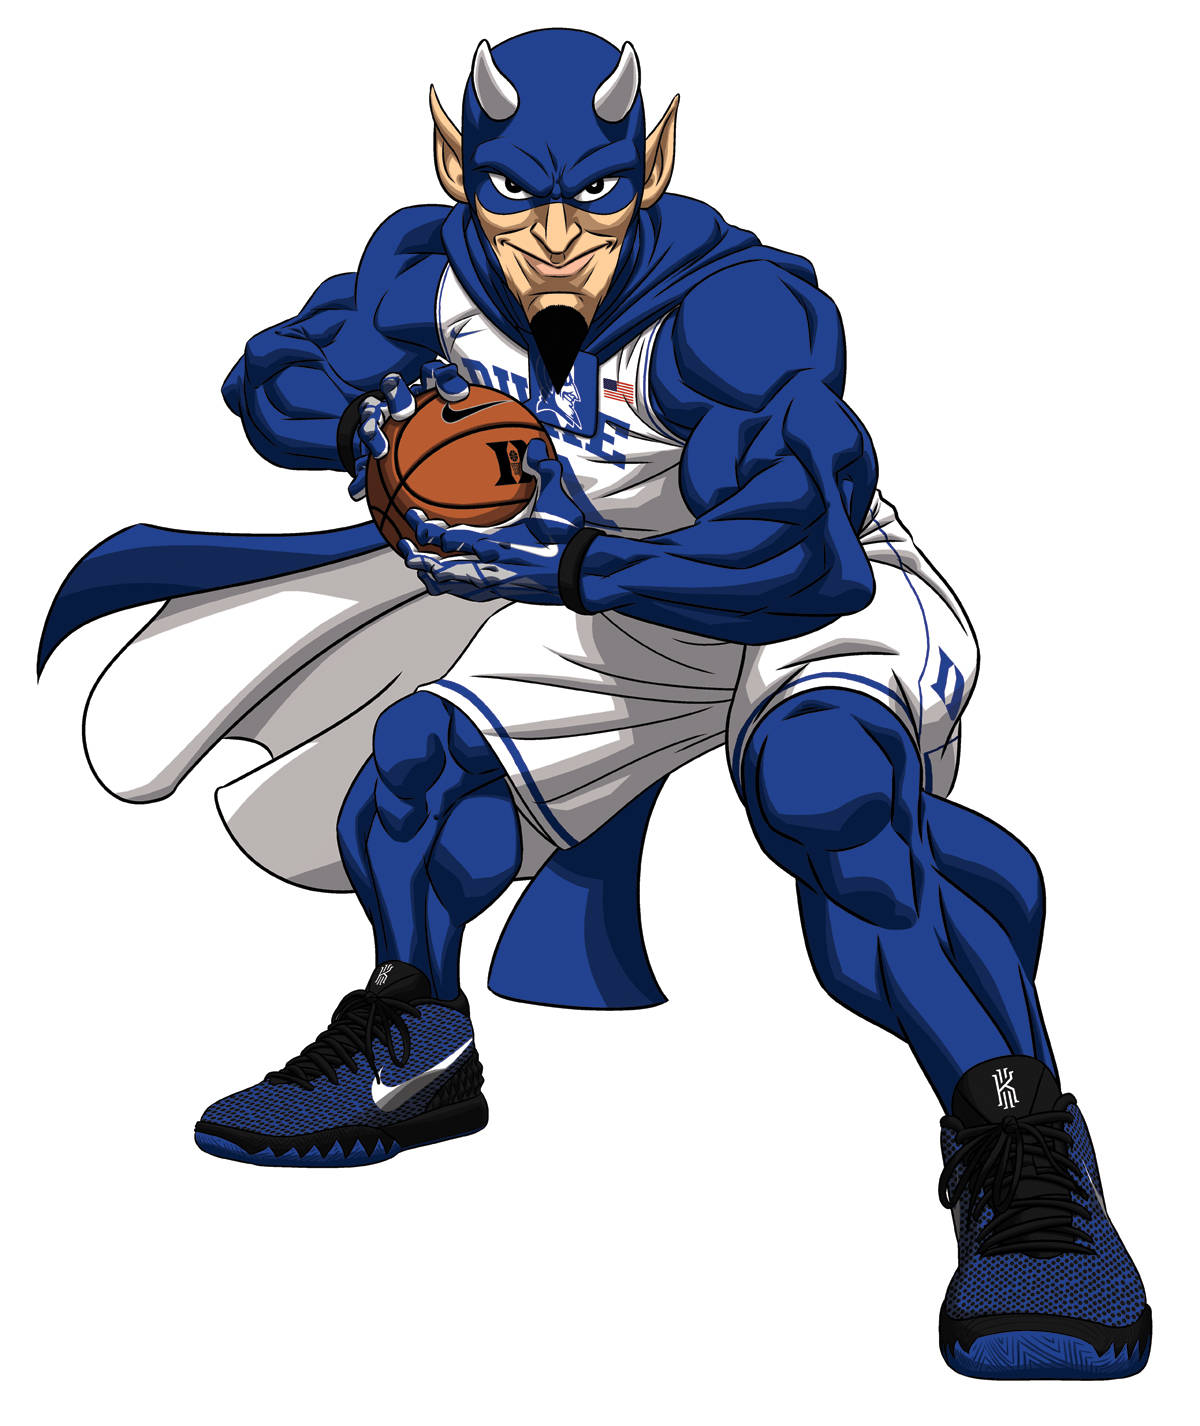 Fierce and Determined Duke Blue Devils Basketball Character Ready for Action Wallpaper